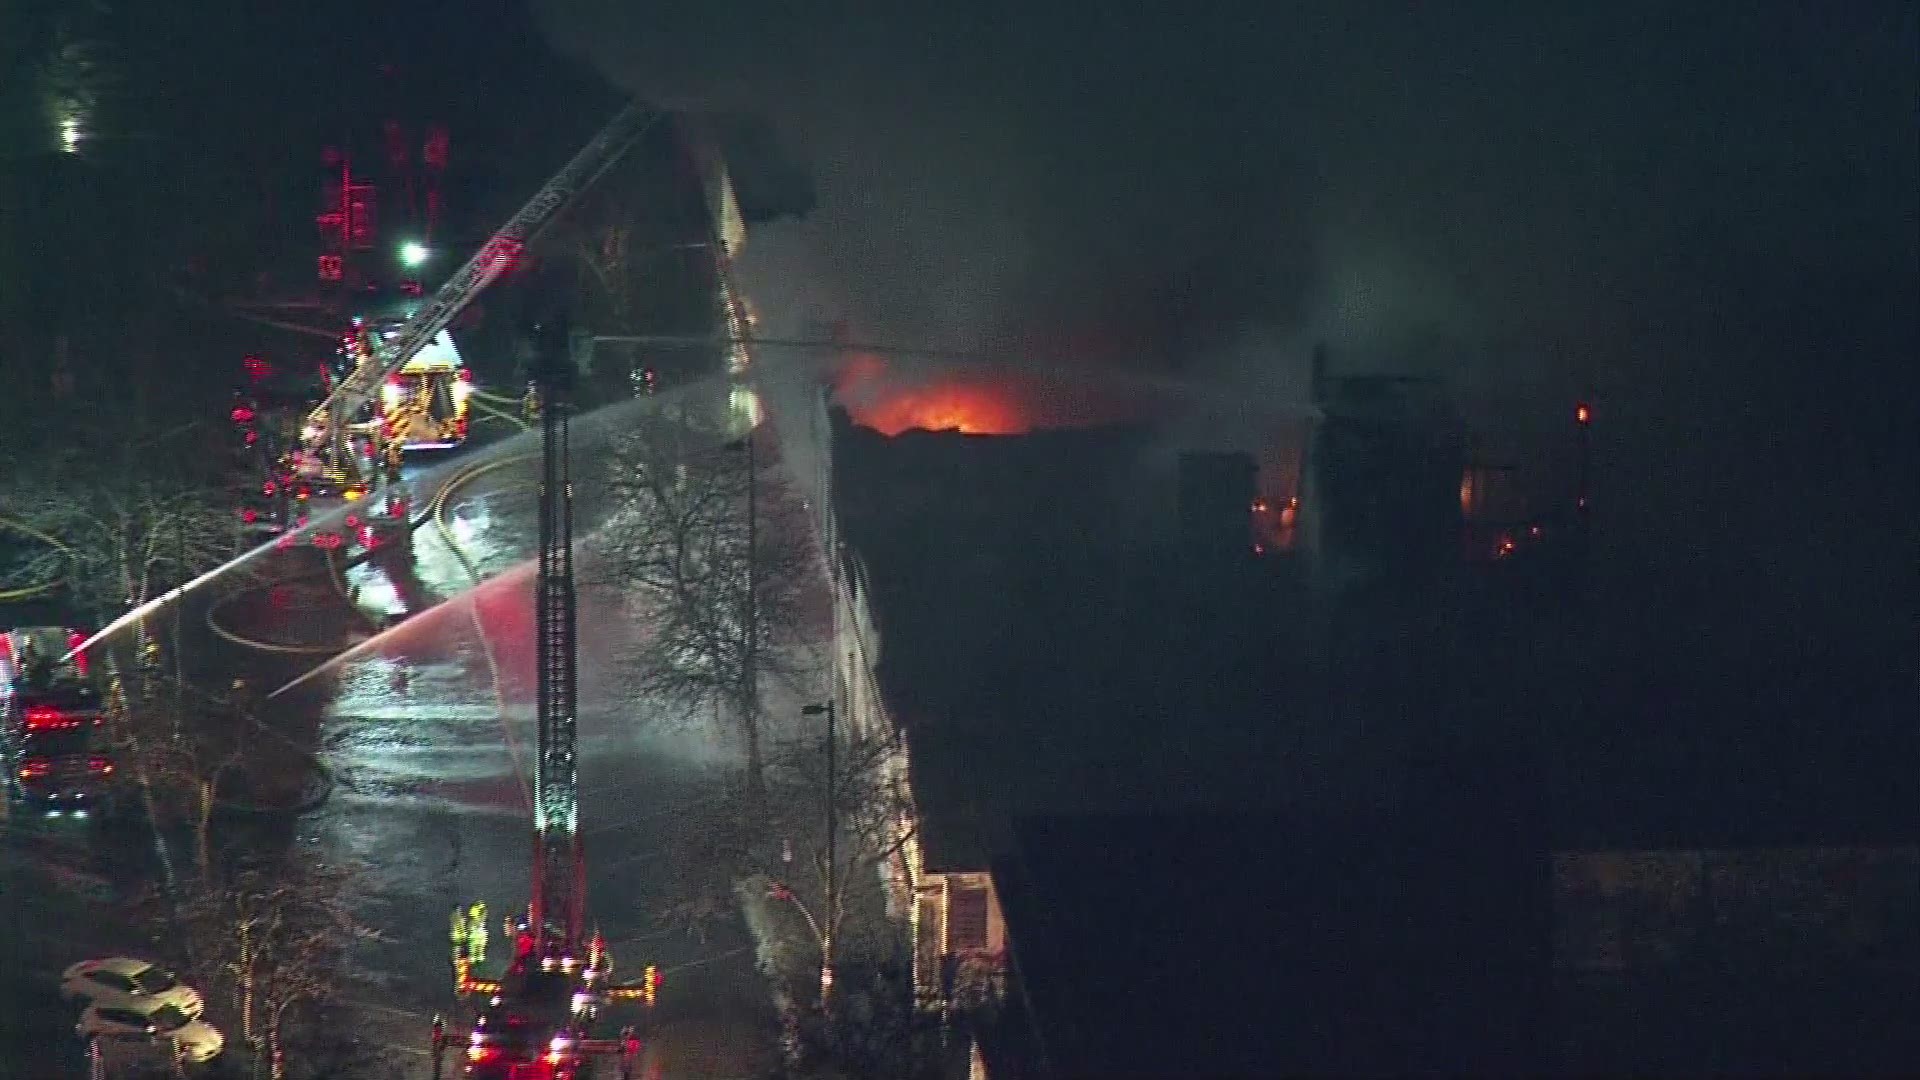 Raw SkyKING aerials above a fire in Bellingham.